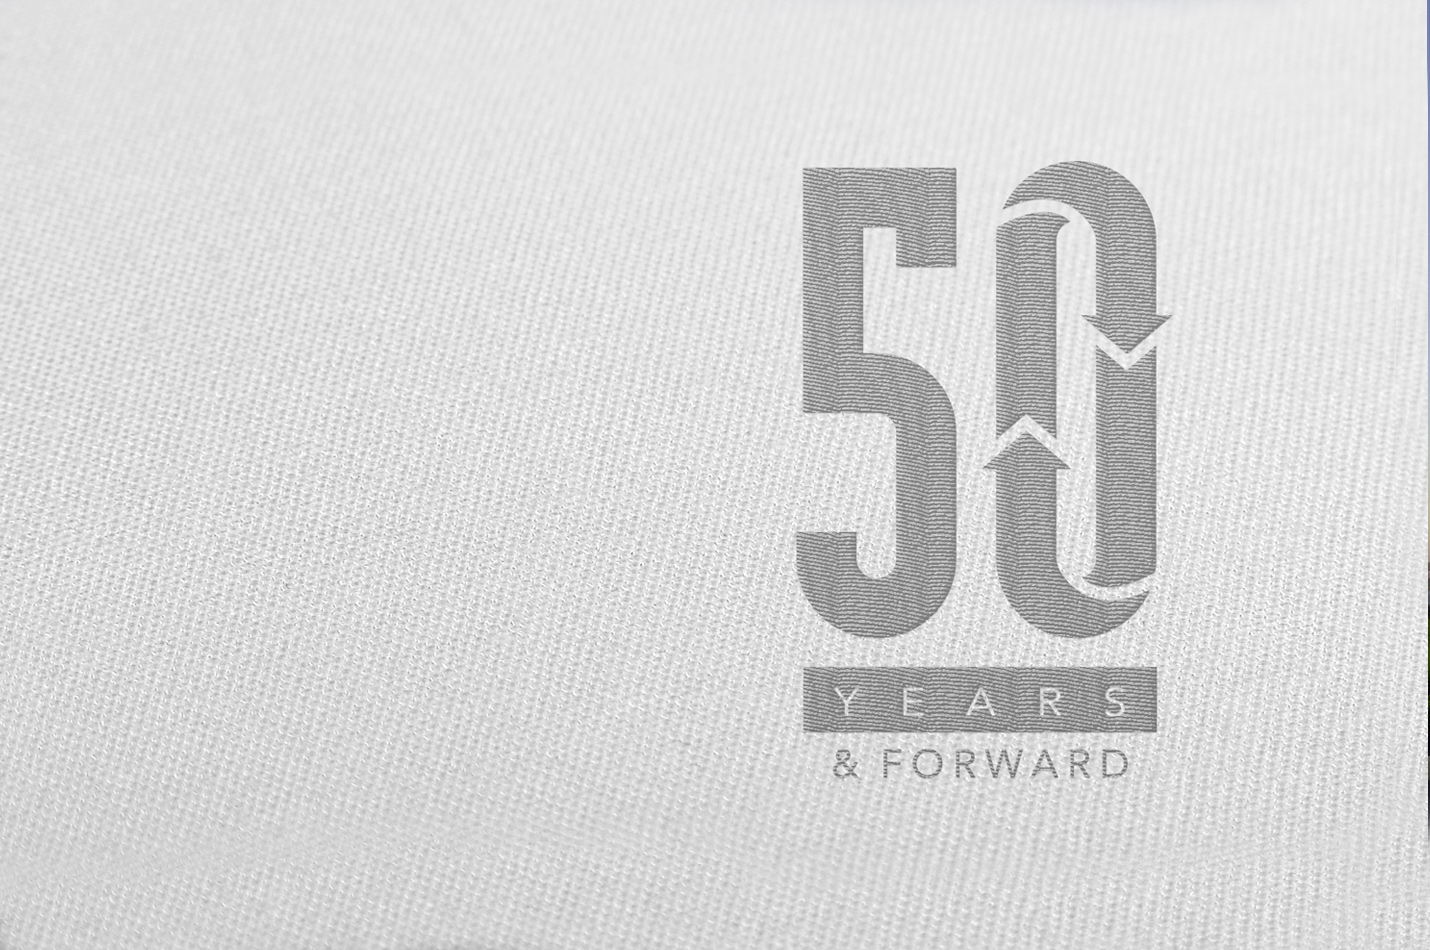 50 years and forward